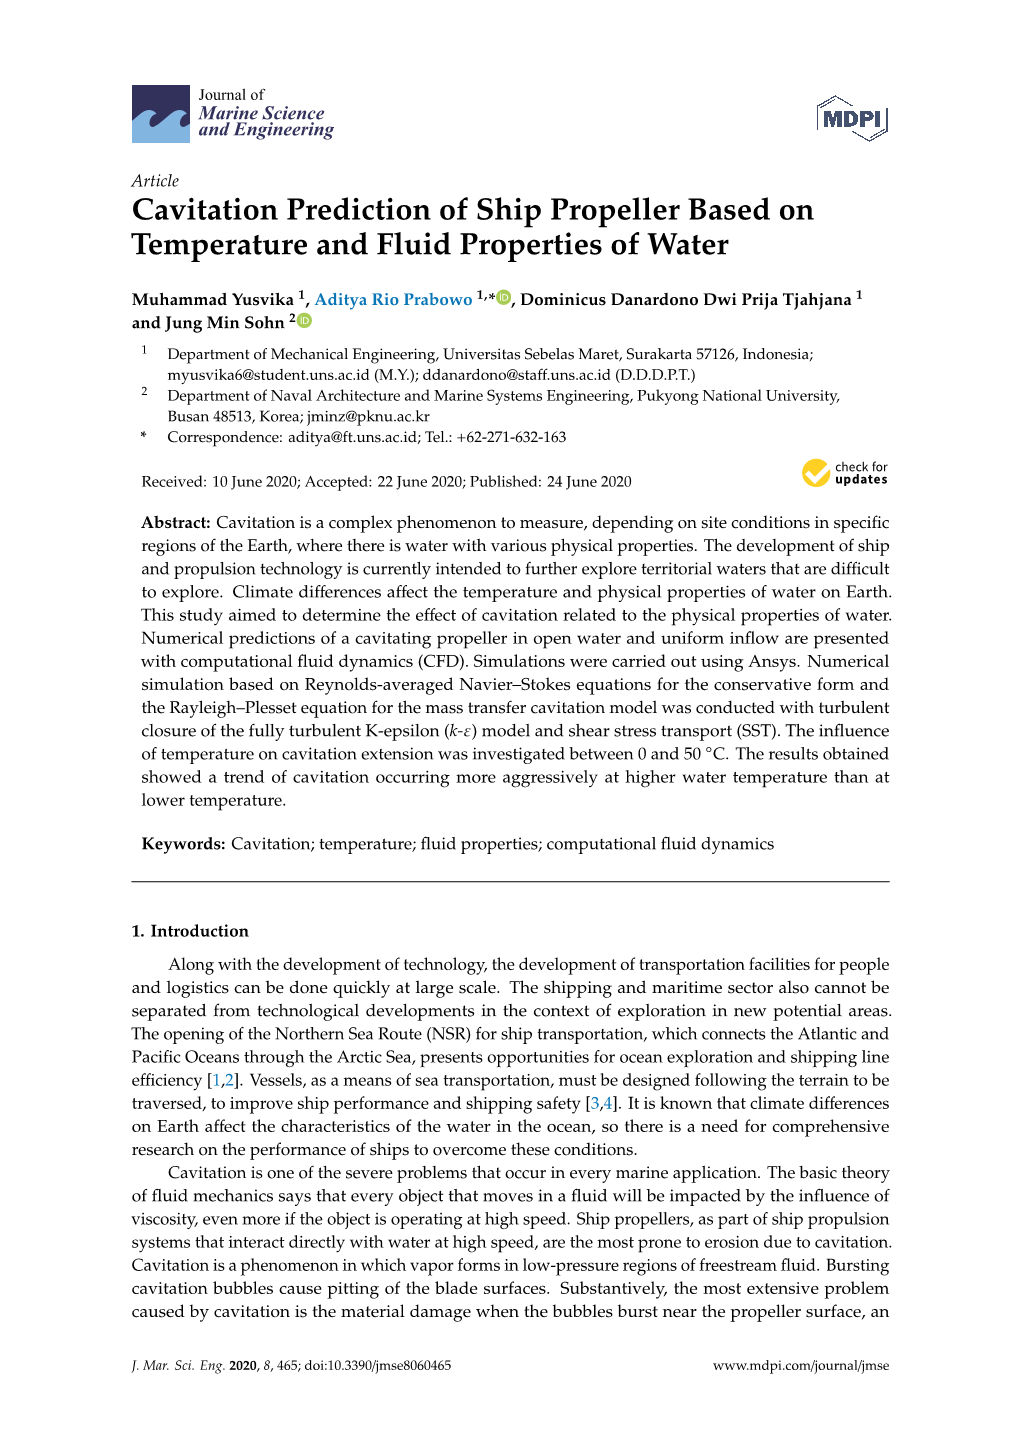 Cavitation Prediction of Ship Propeller Based on Temperature and Fluid Properties of Water